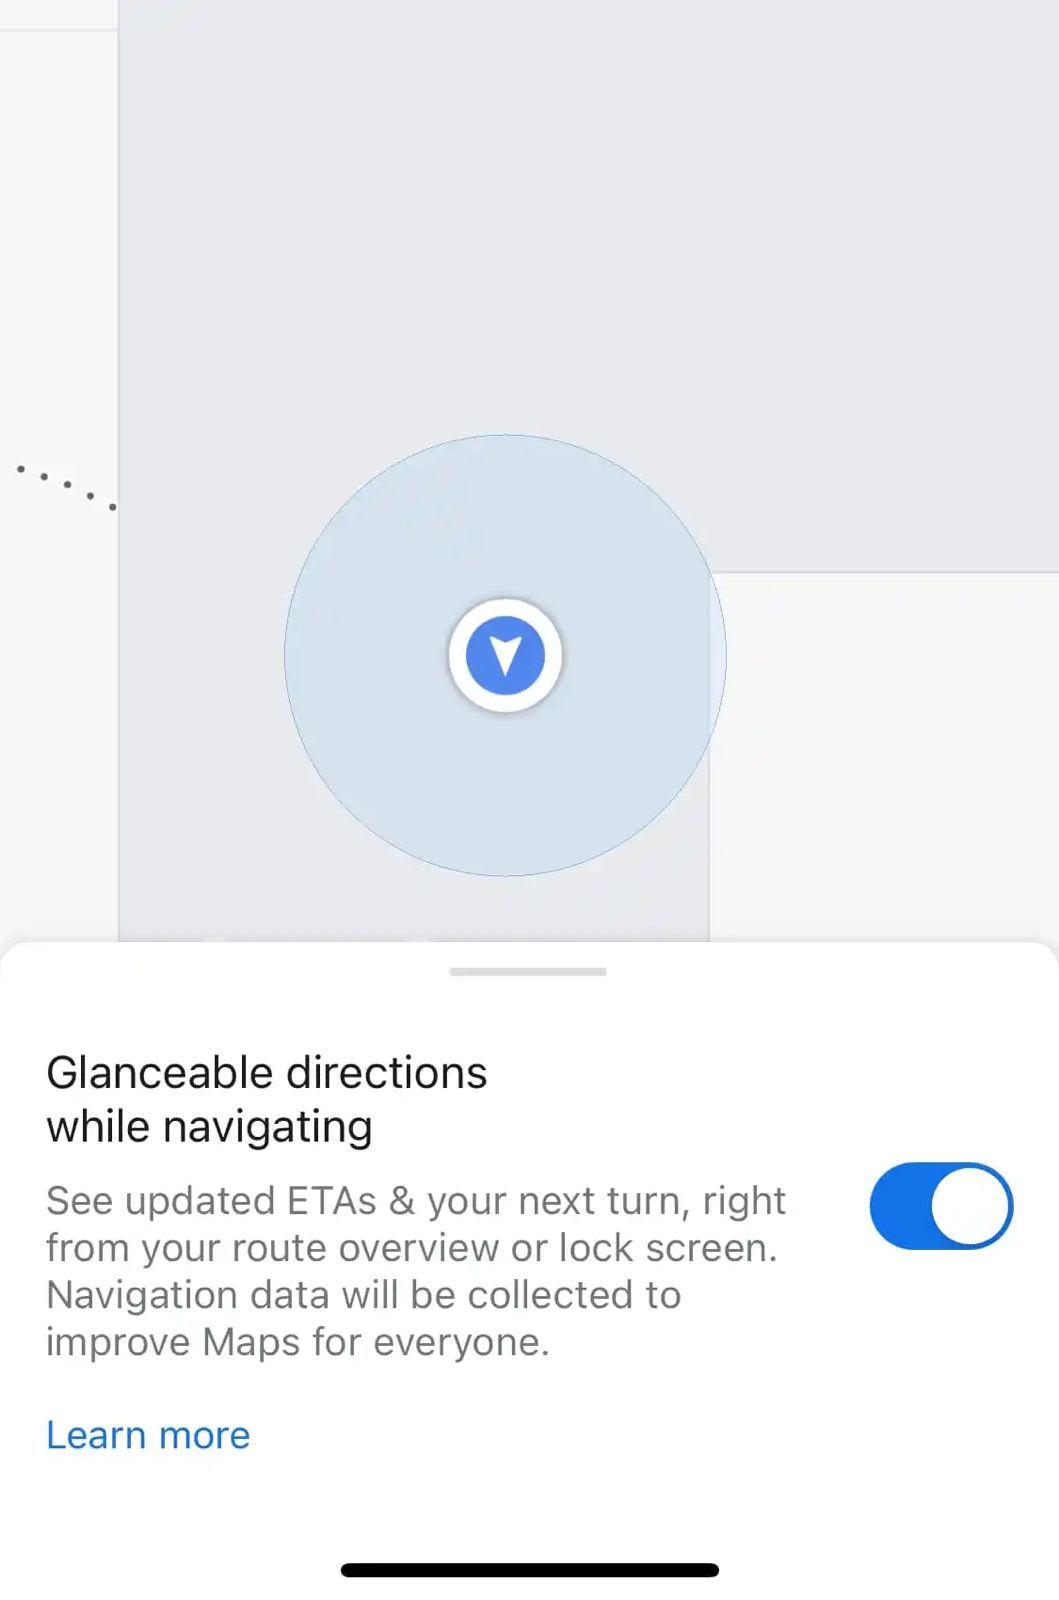 When “Glanceable directions while navigating” is off, you just get a blue dot marking your location